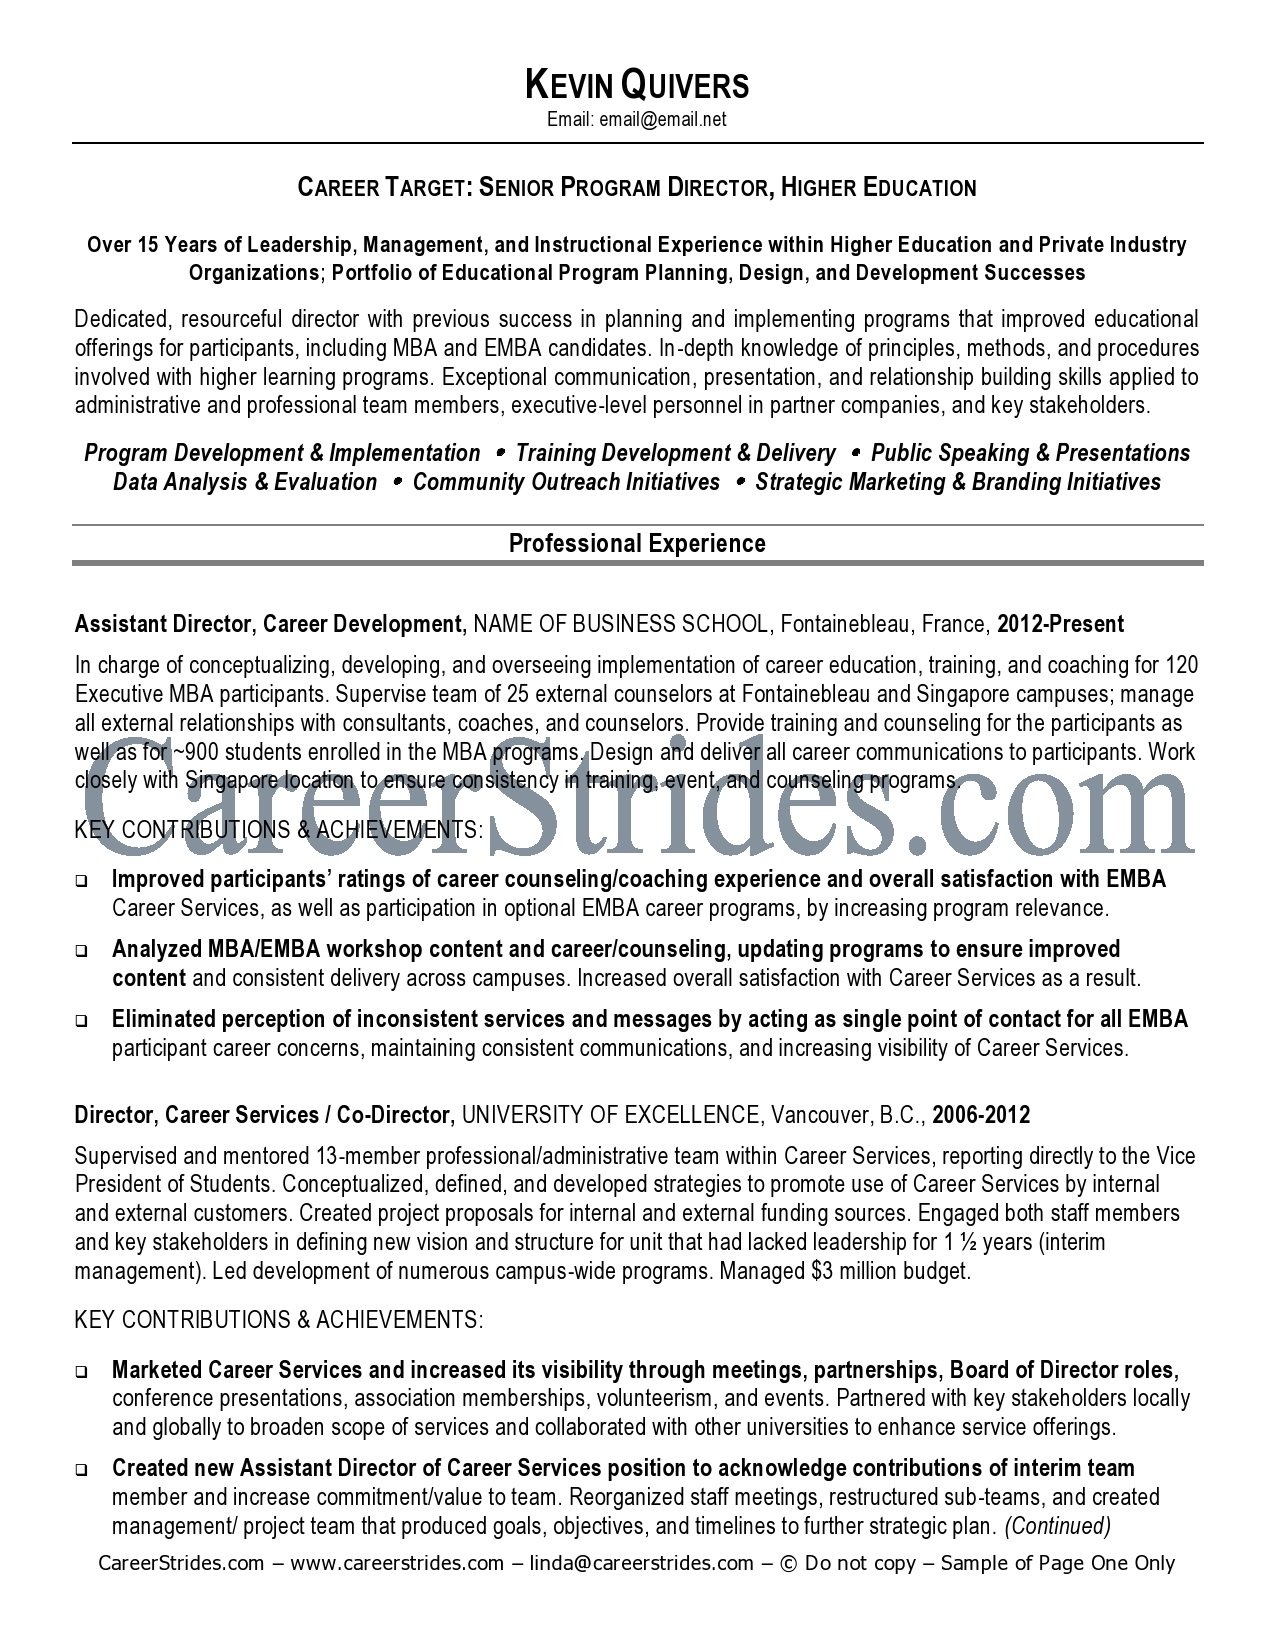 Teacher resume summary of qualifications examples